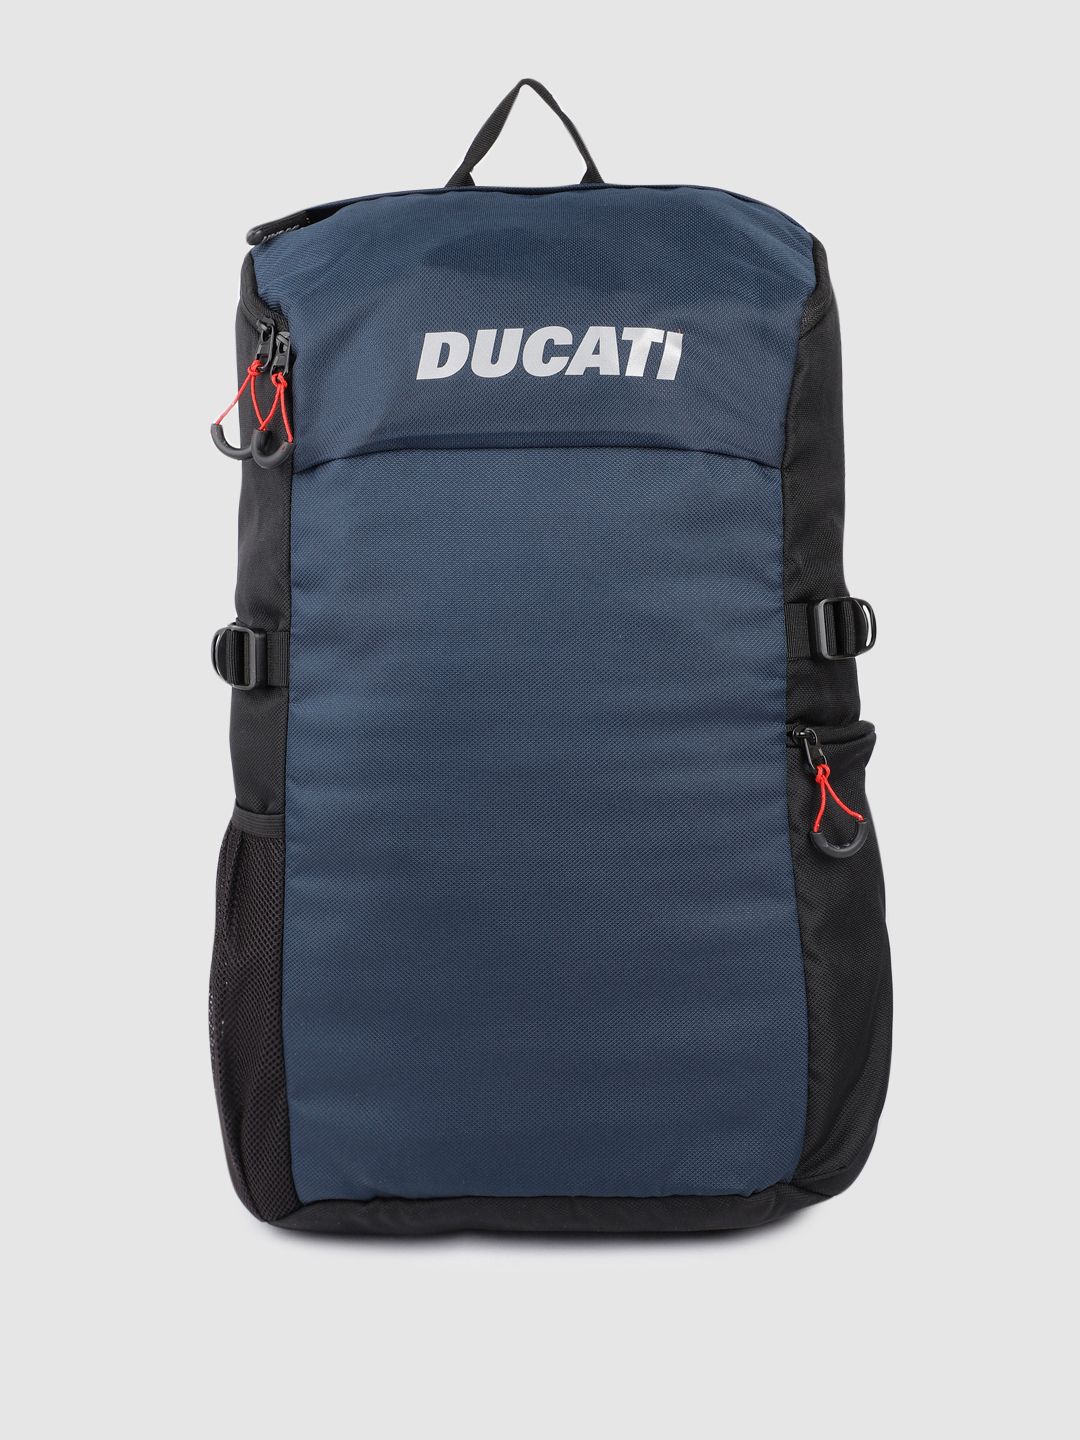 Ducati Unisex Black & Navy Blue Backpack with Compression Straps Price in India